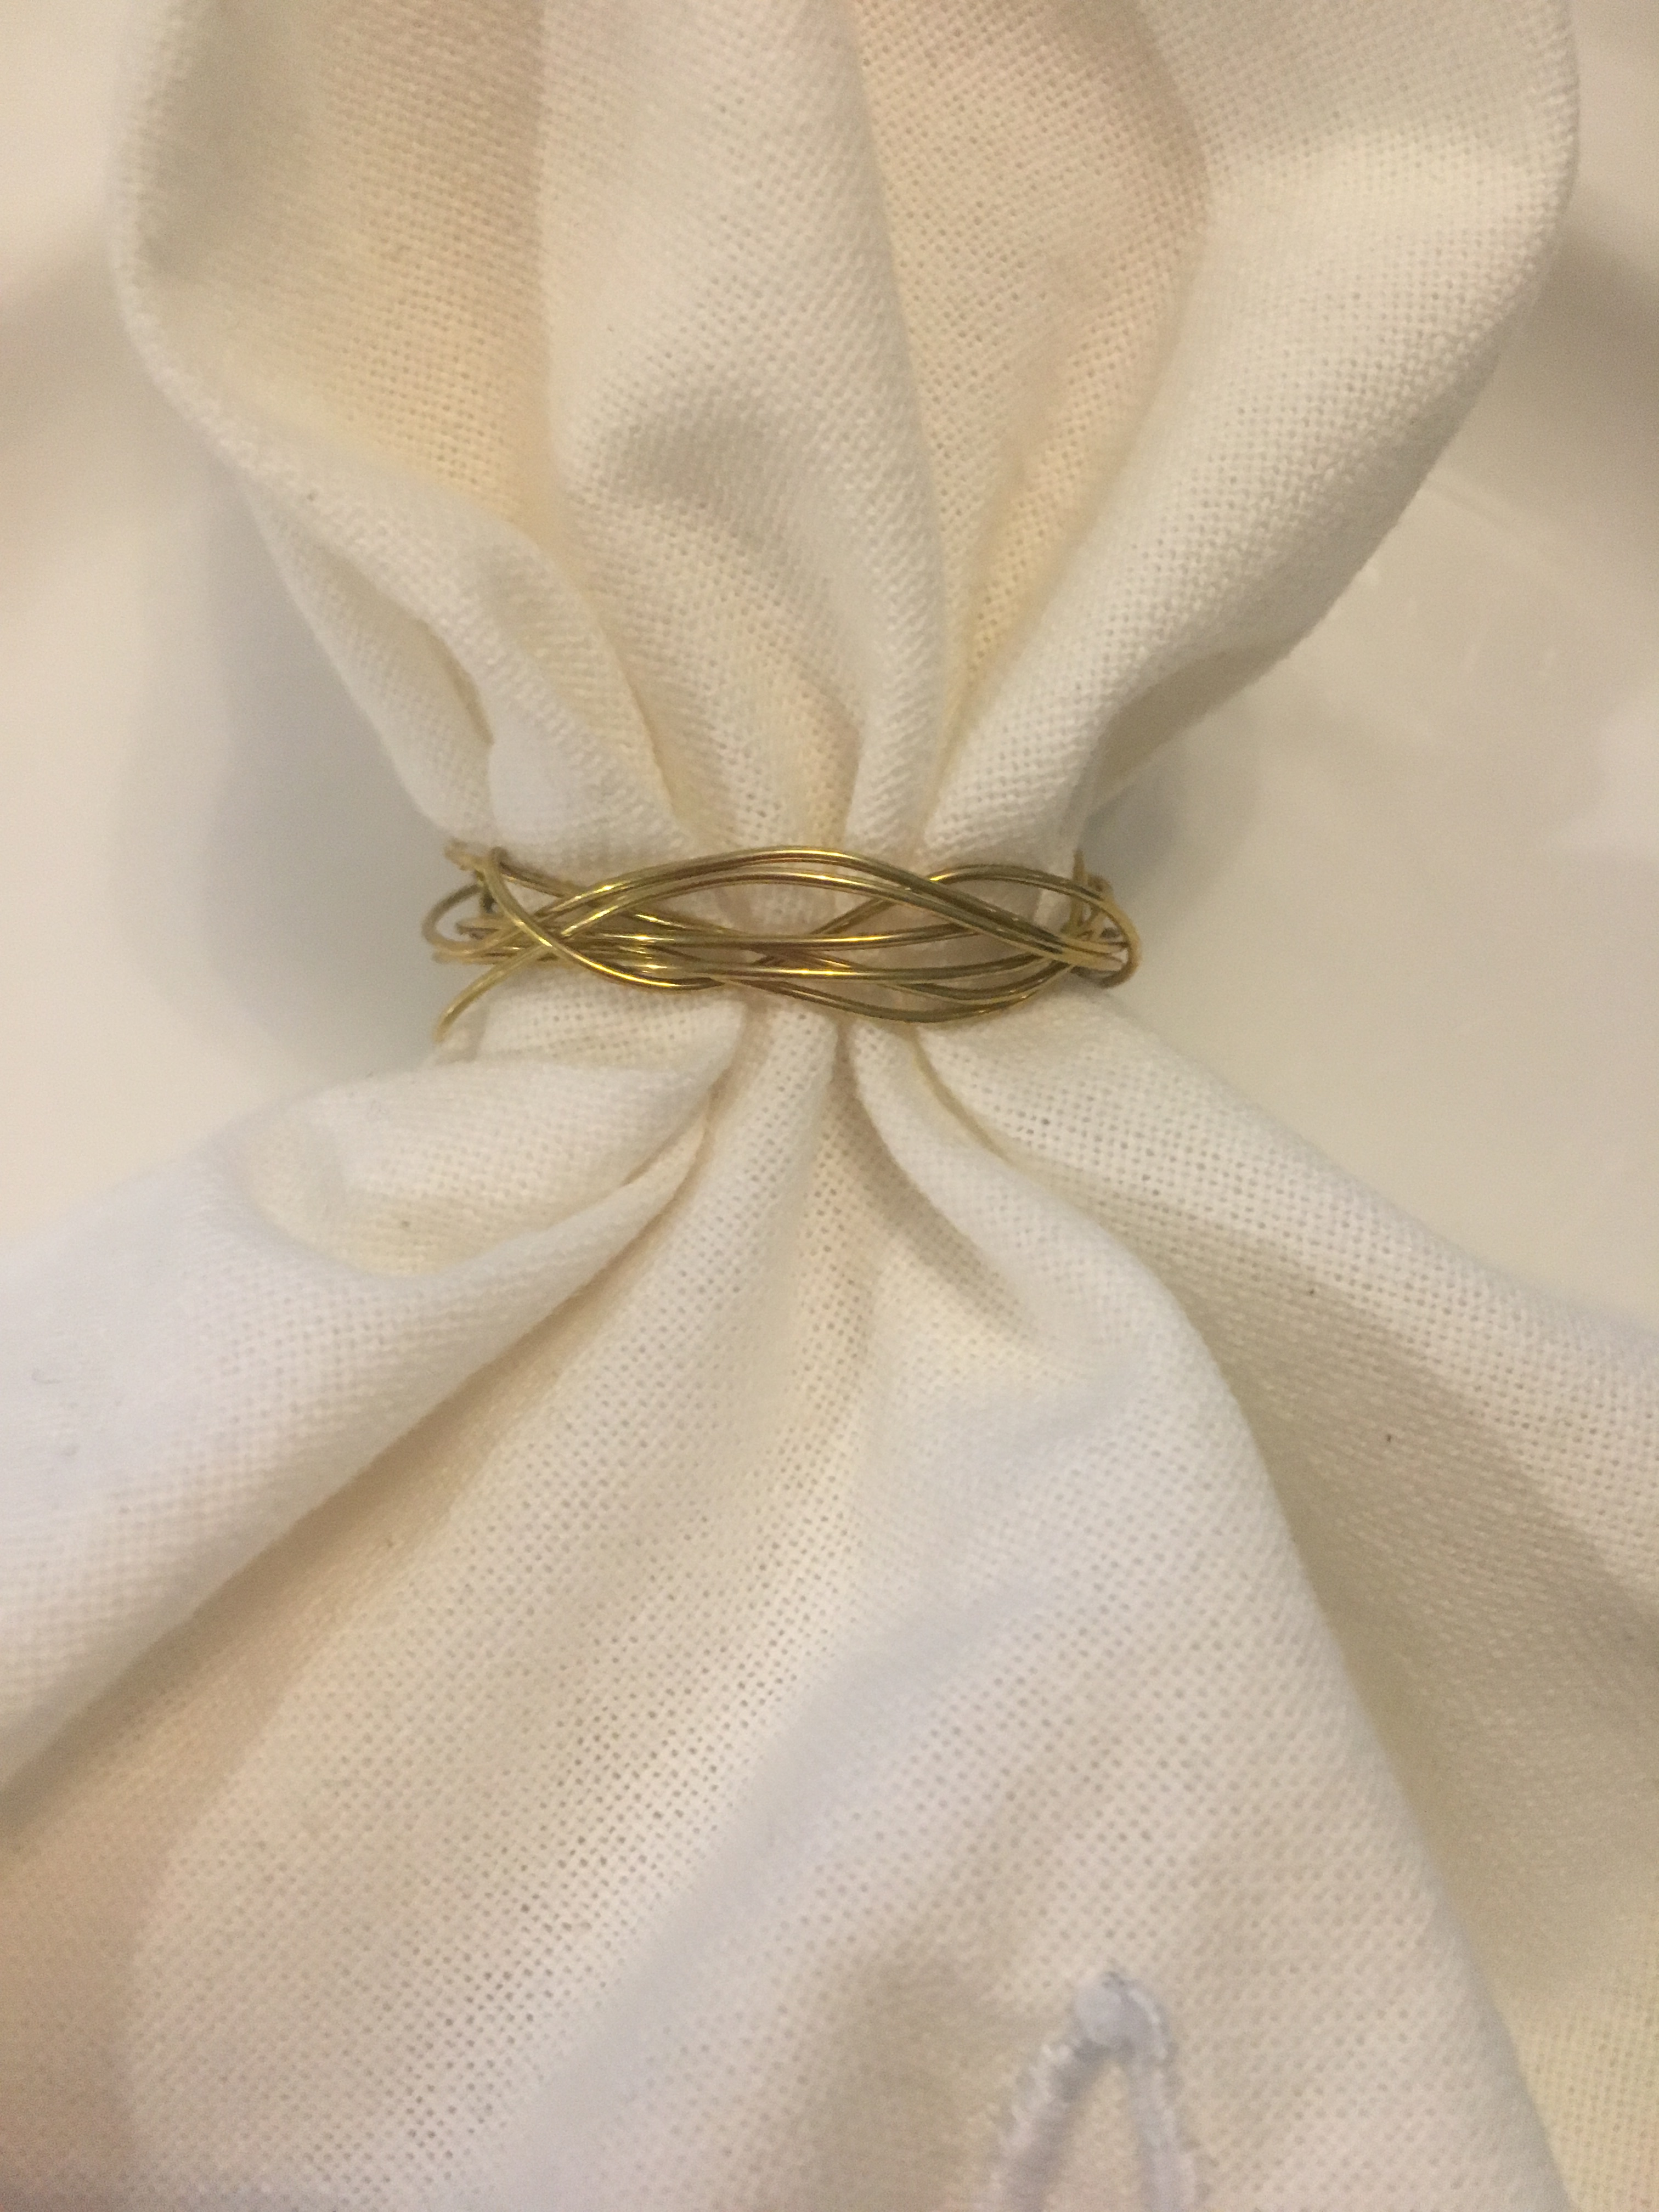 DIY Gold Wire Napkin Rings | The Well Dressed Table